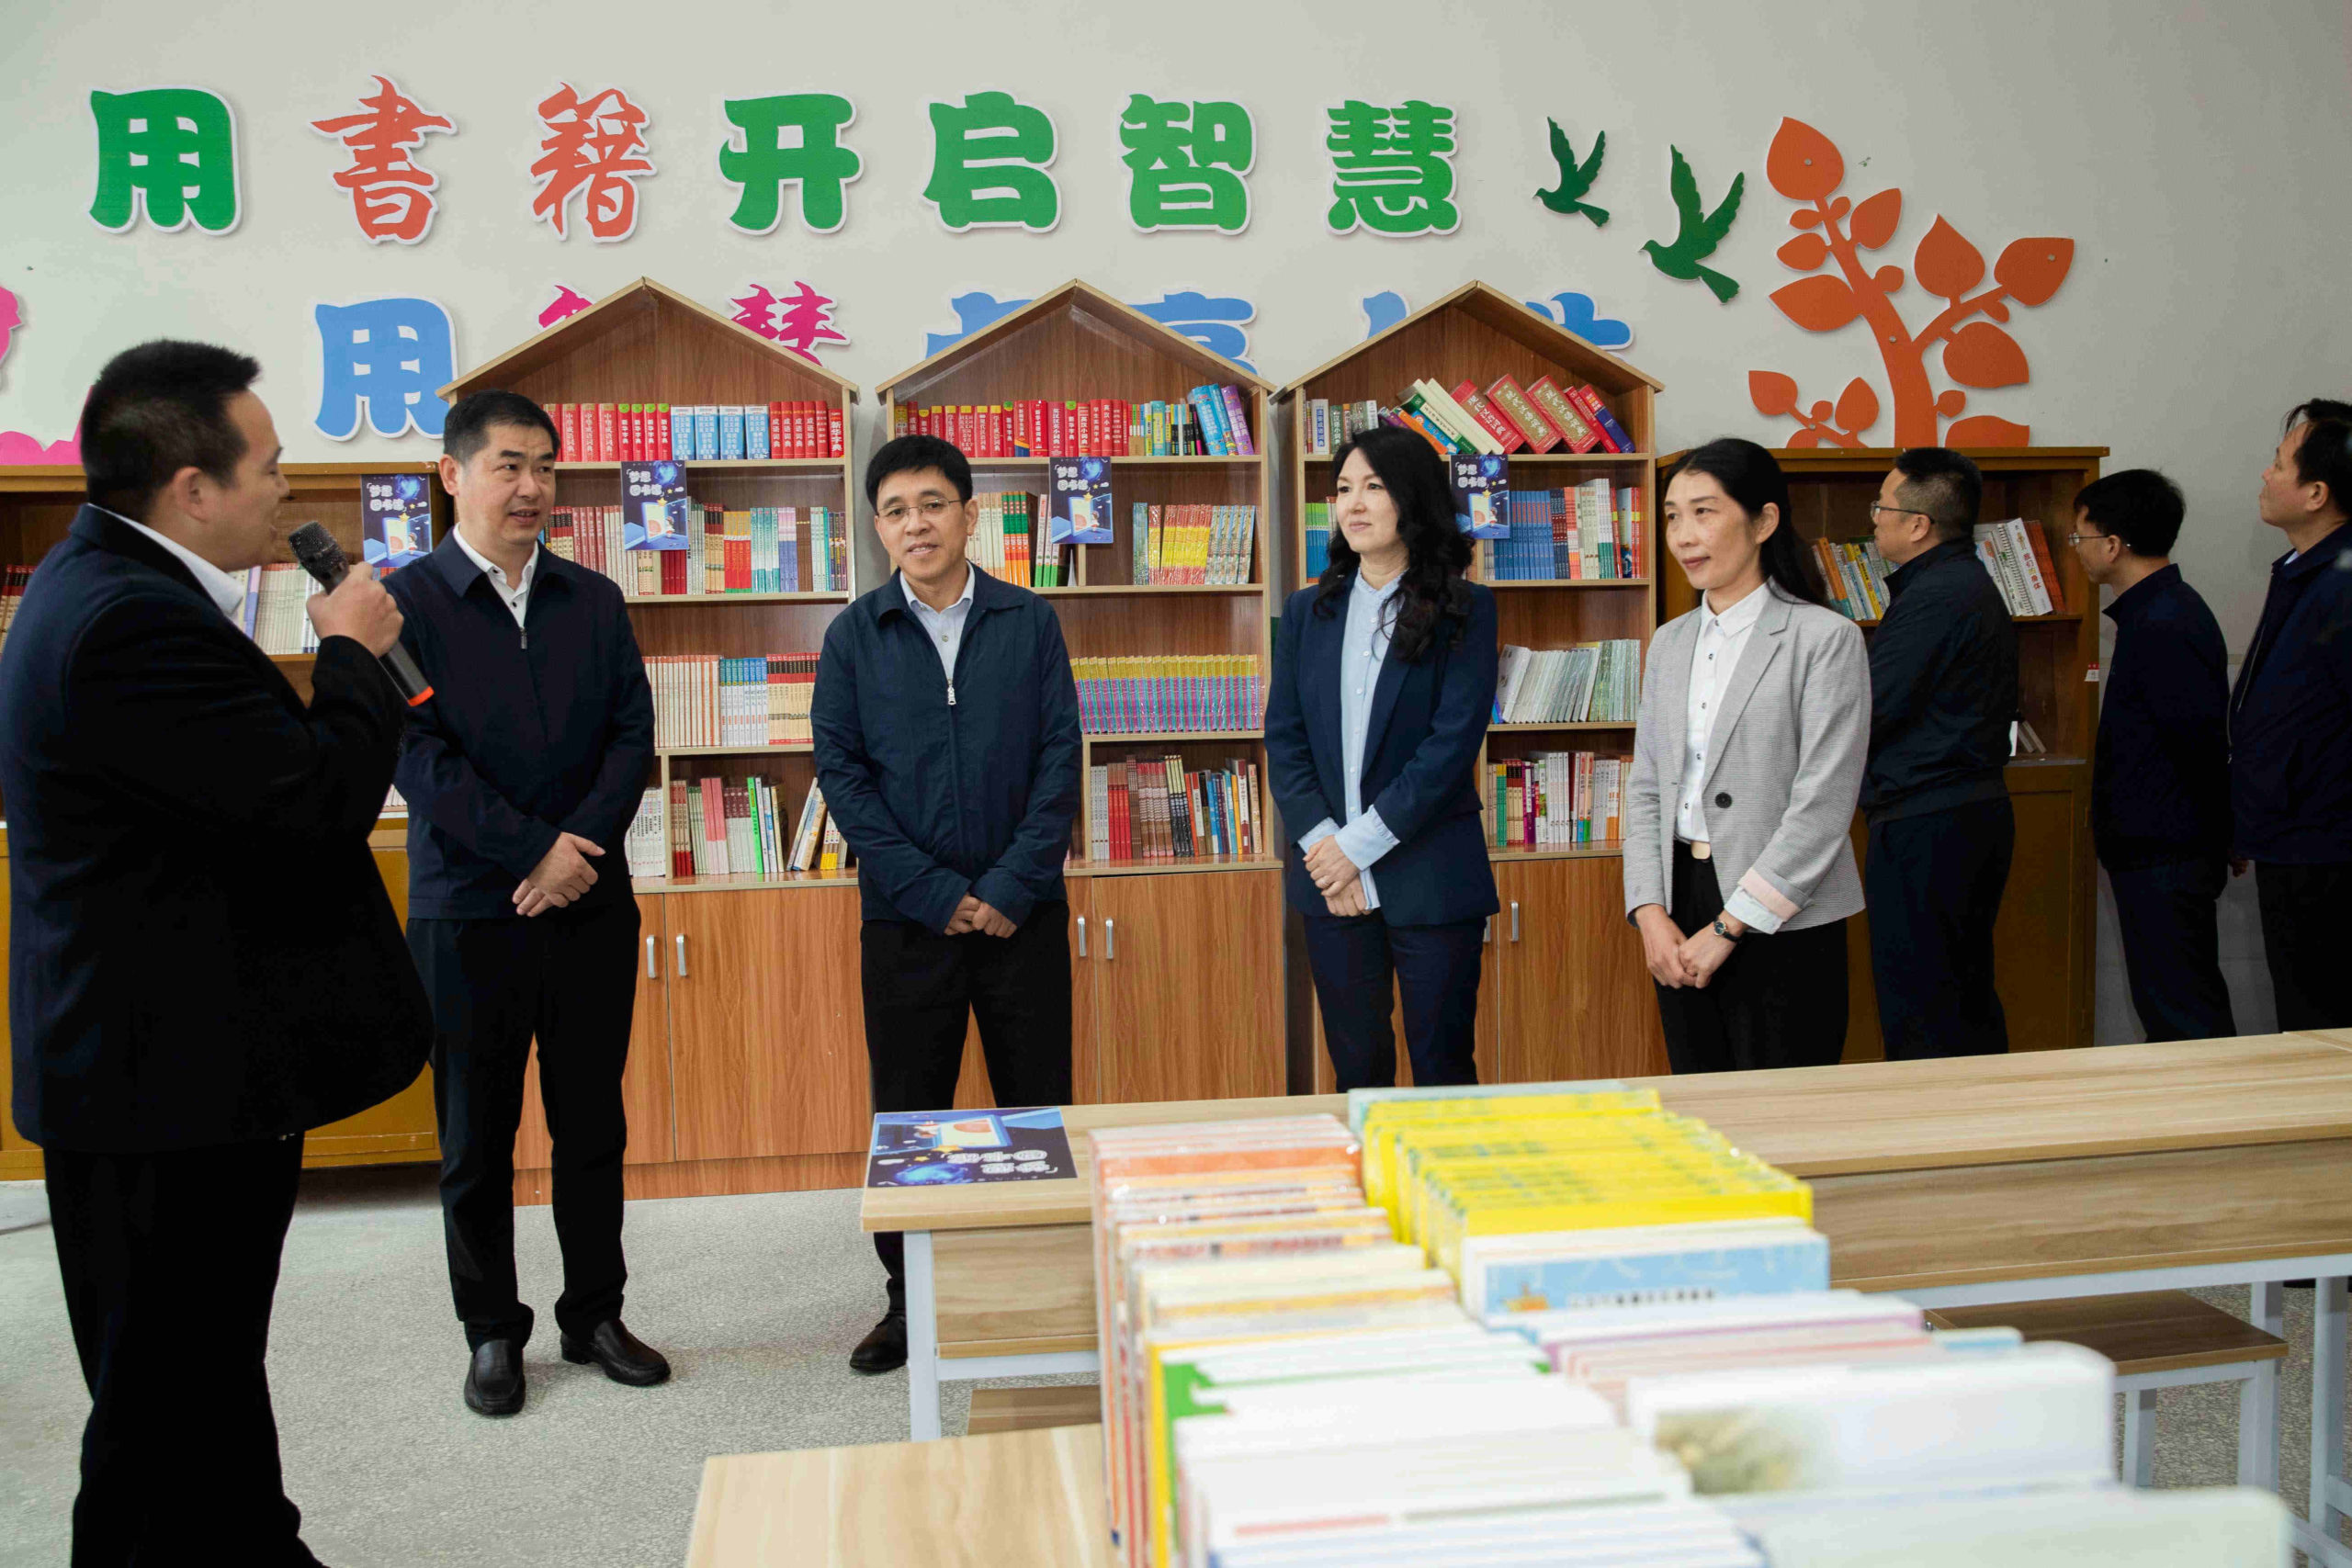 JD.com and Moutai Partner to Build Libraries in Rural Schools